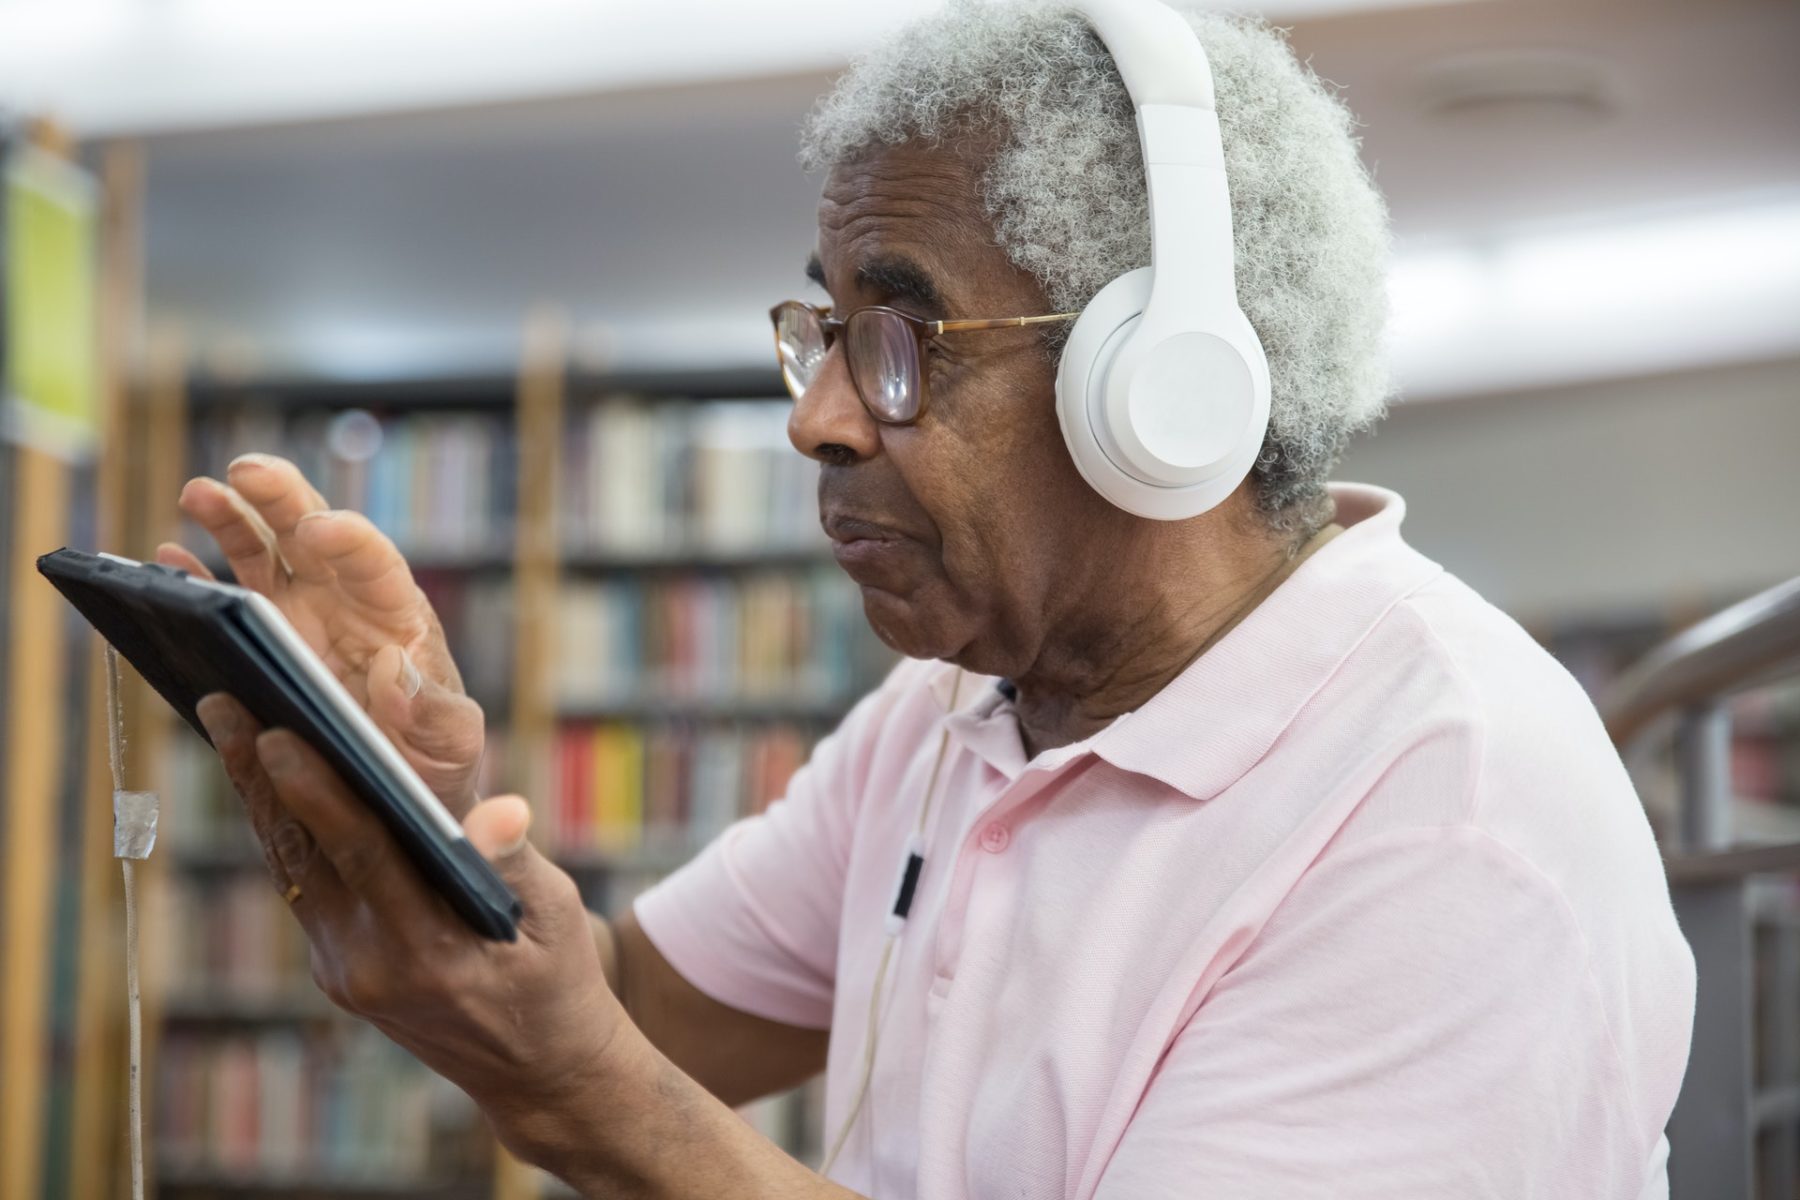 An elderly man stays cool listening to music at the library.